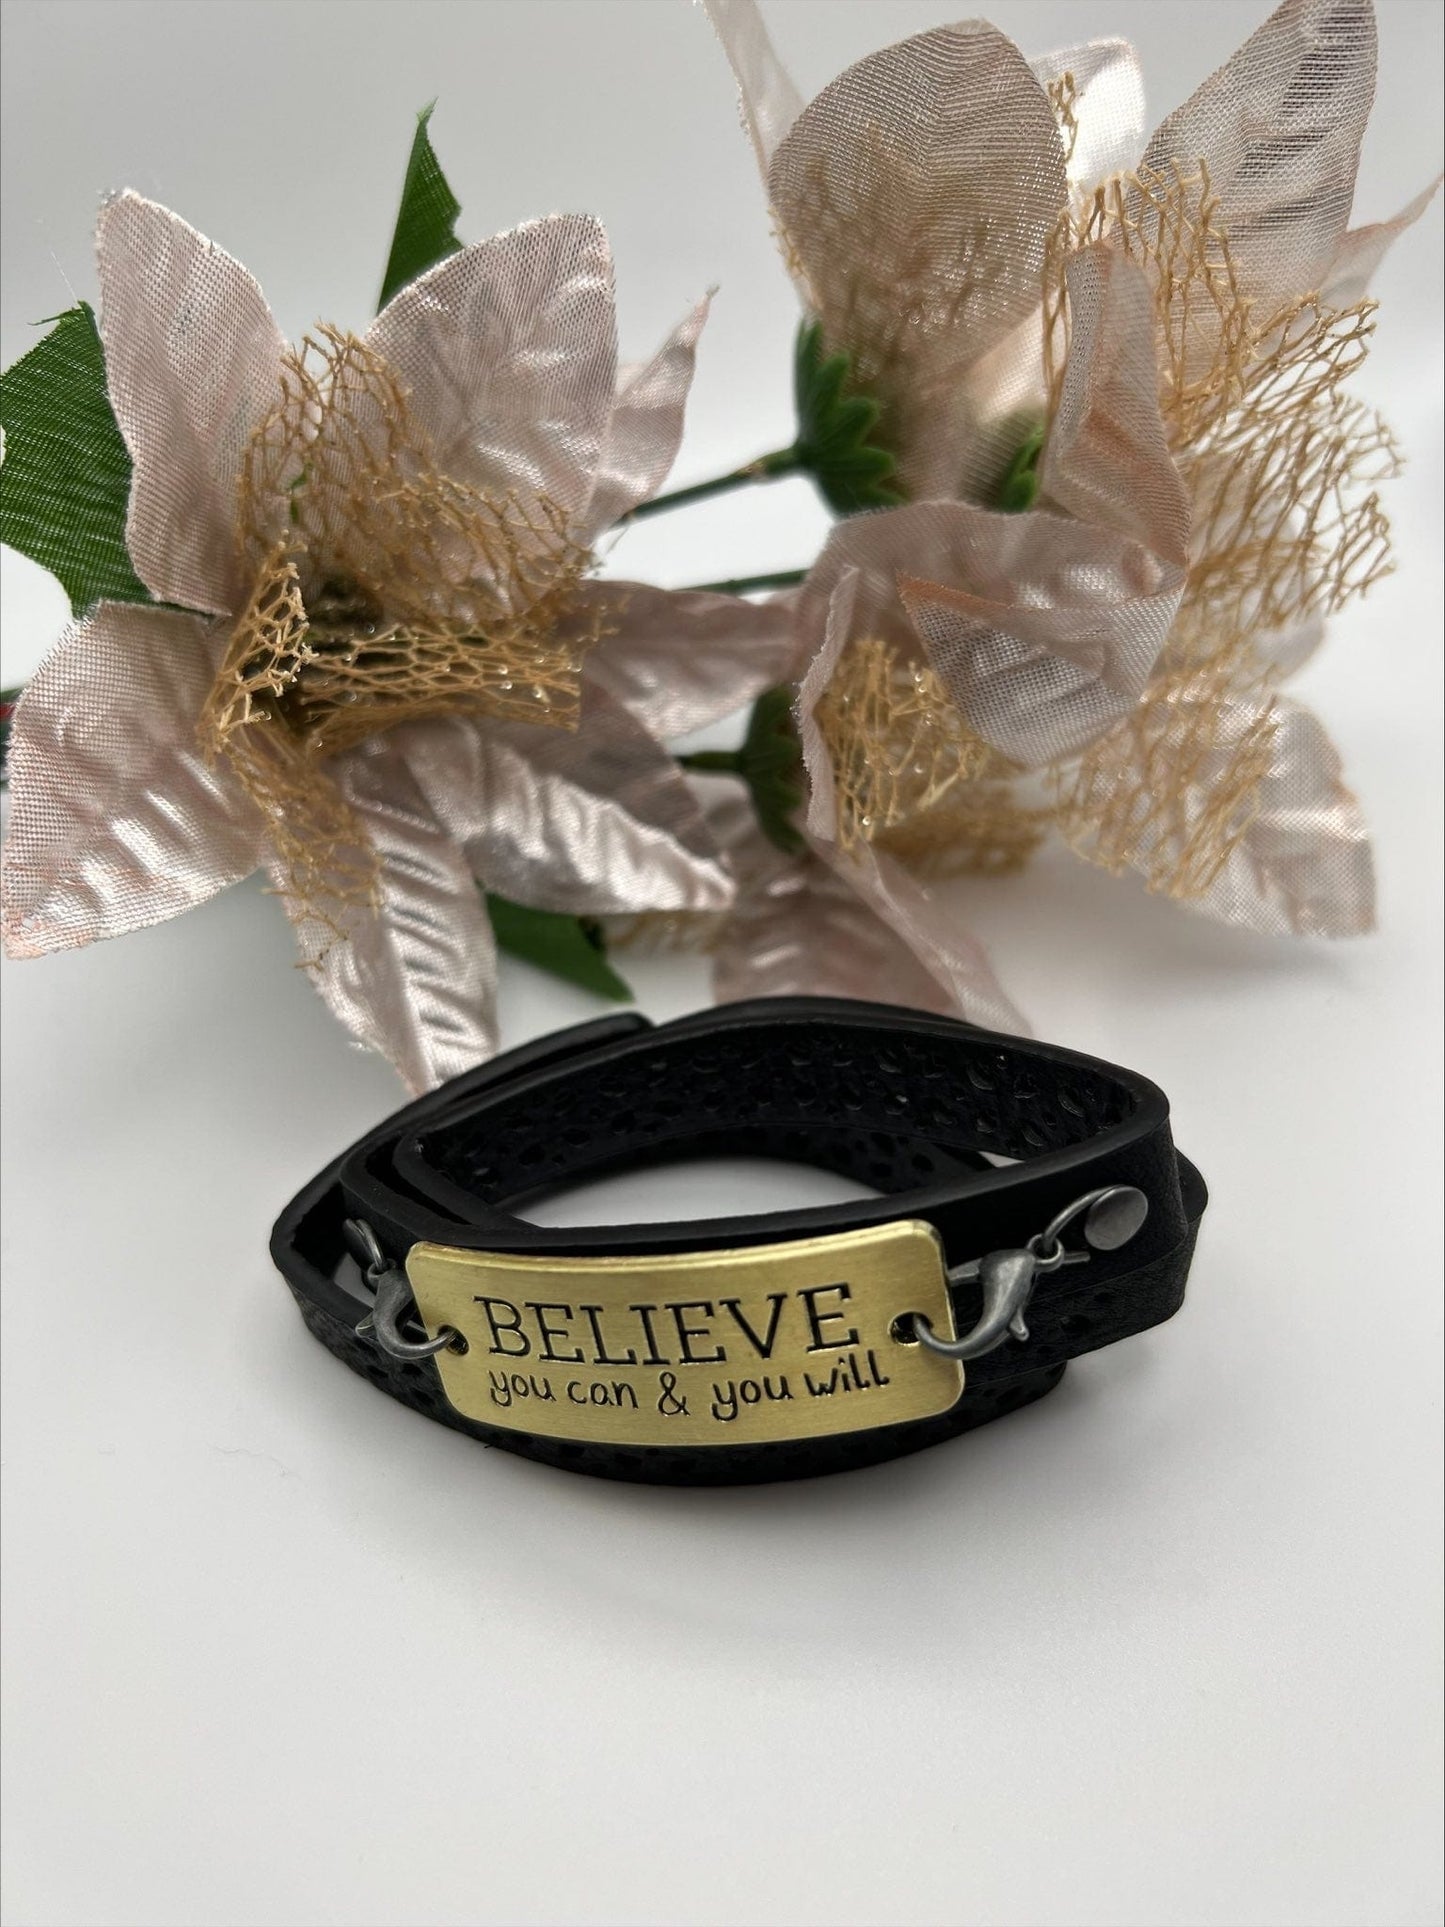 Michelle's Creatives Wrap Bracelet Black Faux Leather "Believe You Can and You Will" Wrap Bracelet 22" BLKWRAP-BELIEVE-BRACELET-22